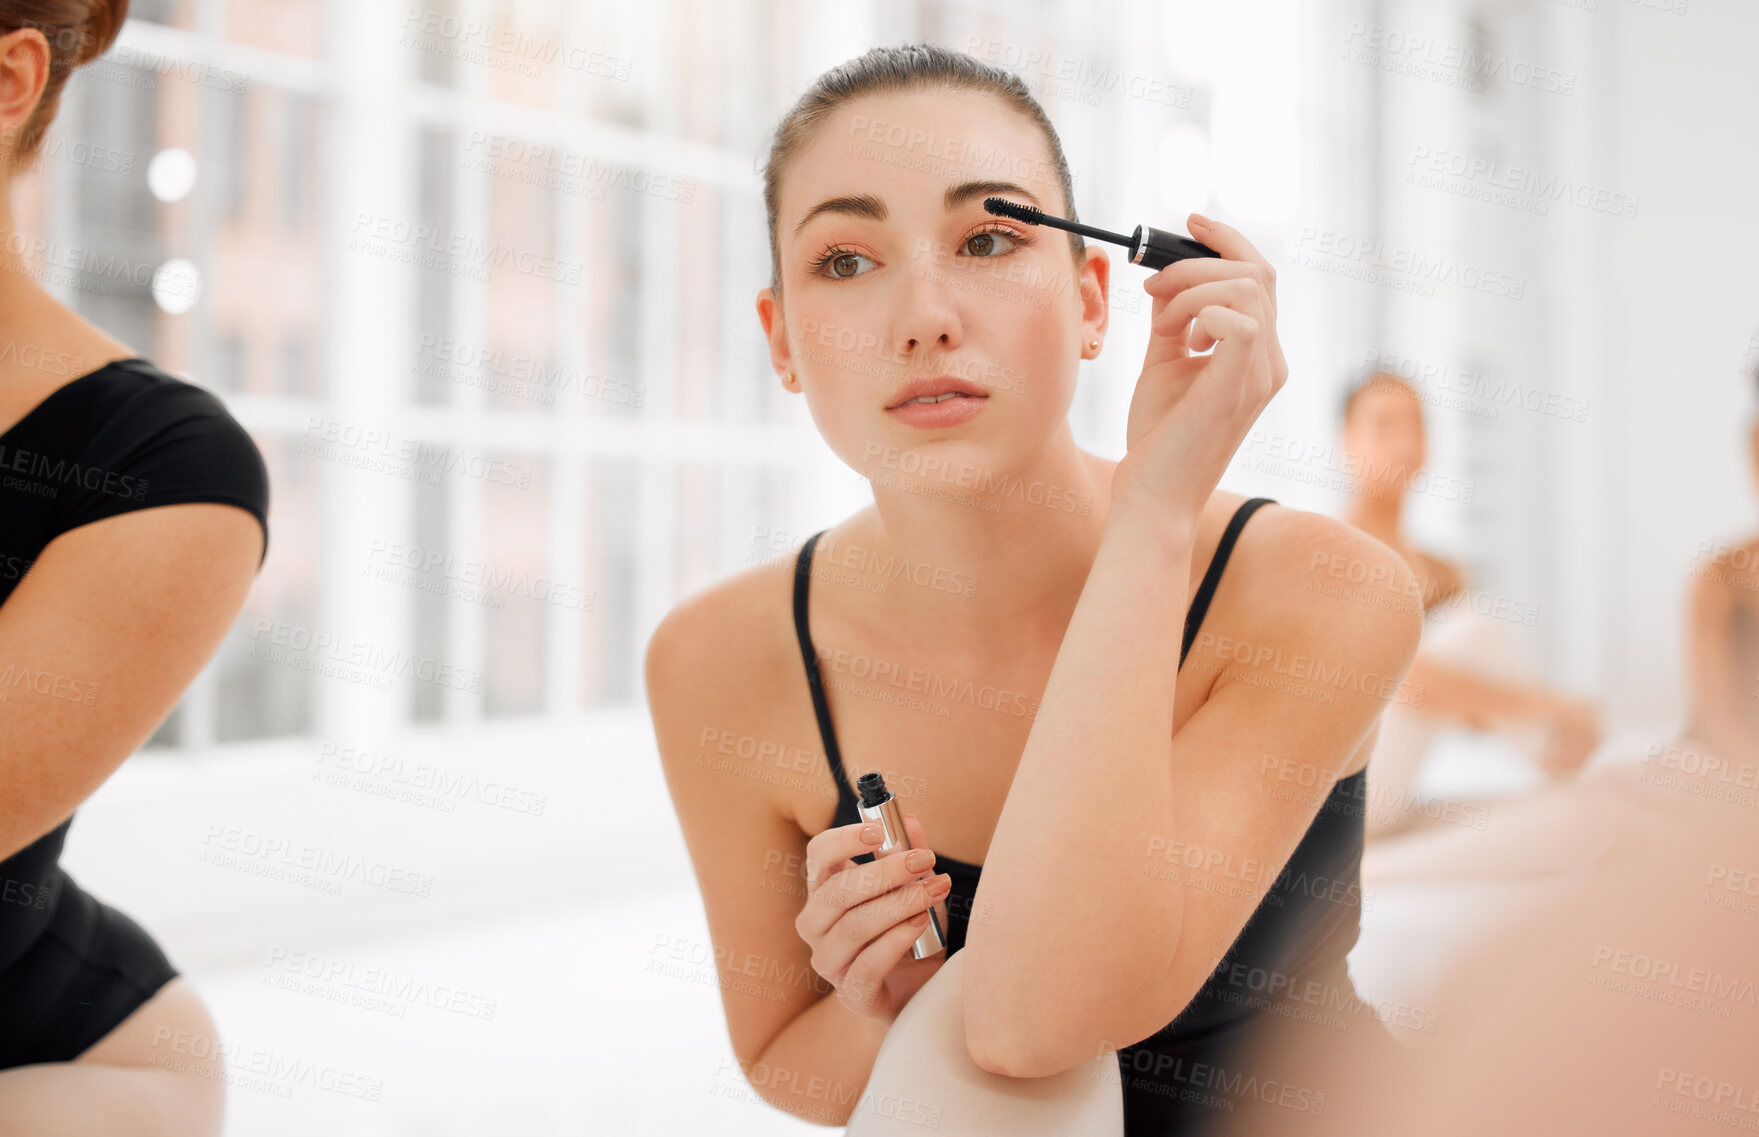 Buy stock photo Shot of a group of ballet dancers preparing to go on stage and applying makeup together in a mirror